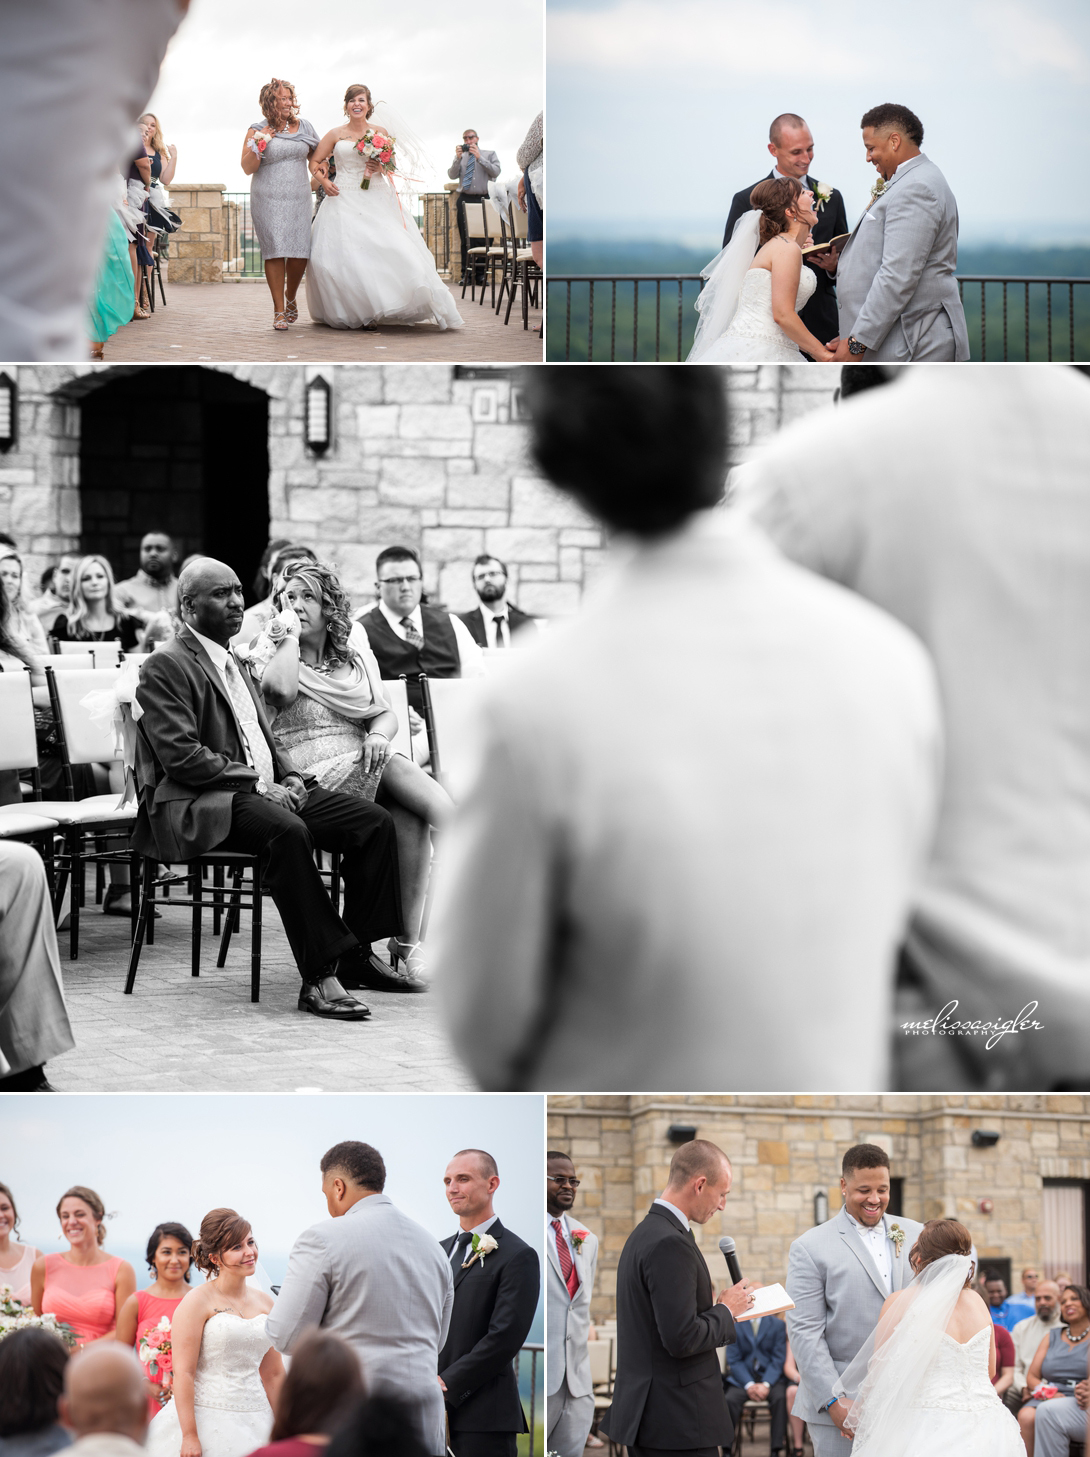 Rooftop outdoor wedding at the Oread